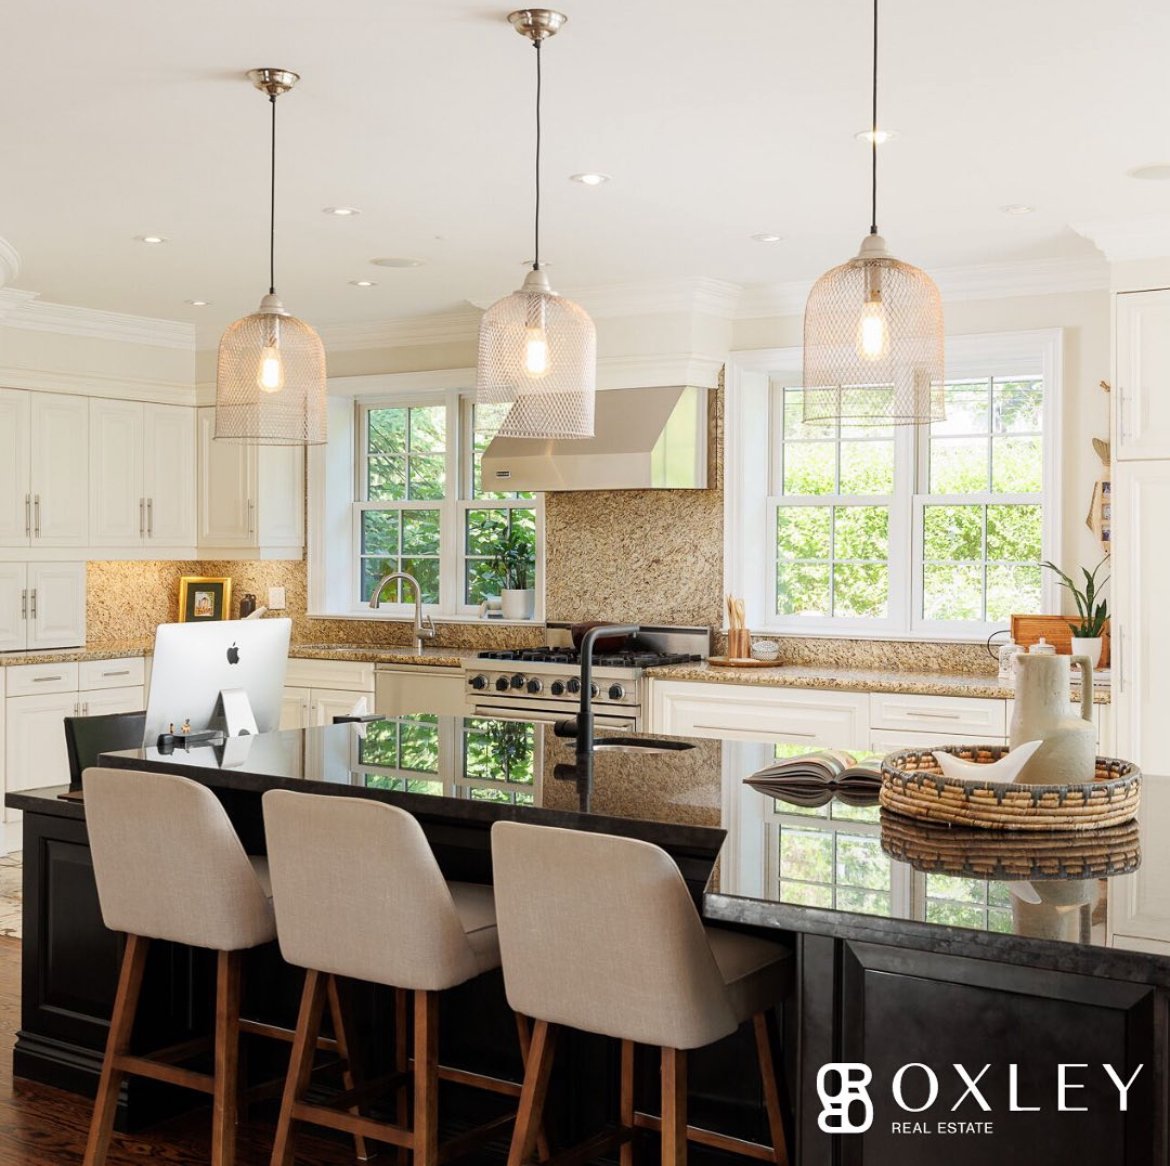  Image from @  oxleyrealestate     on Instagram 